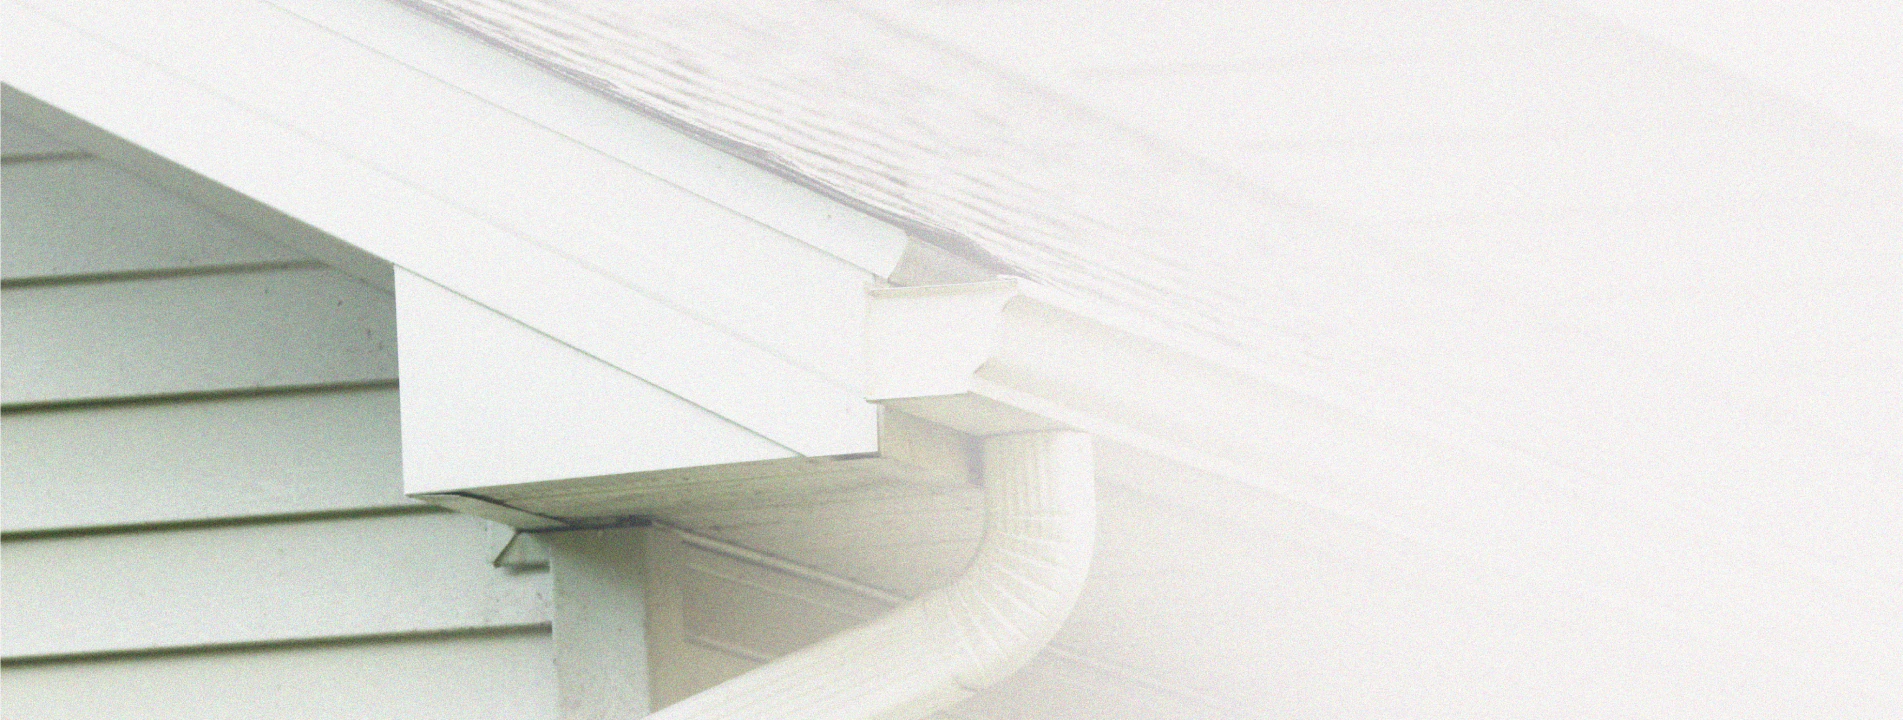 house gutter with soffit and fascia